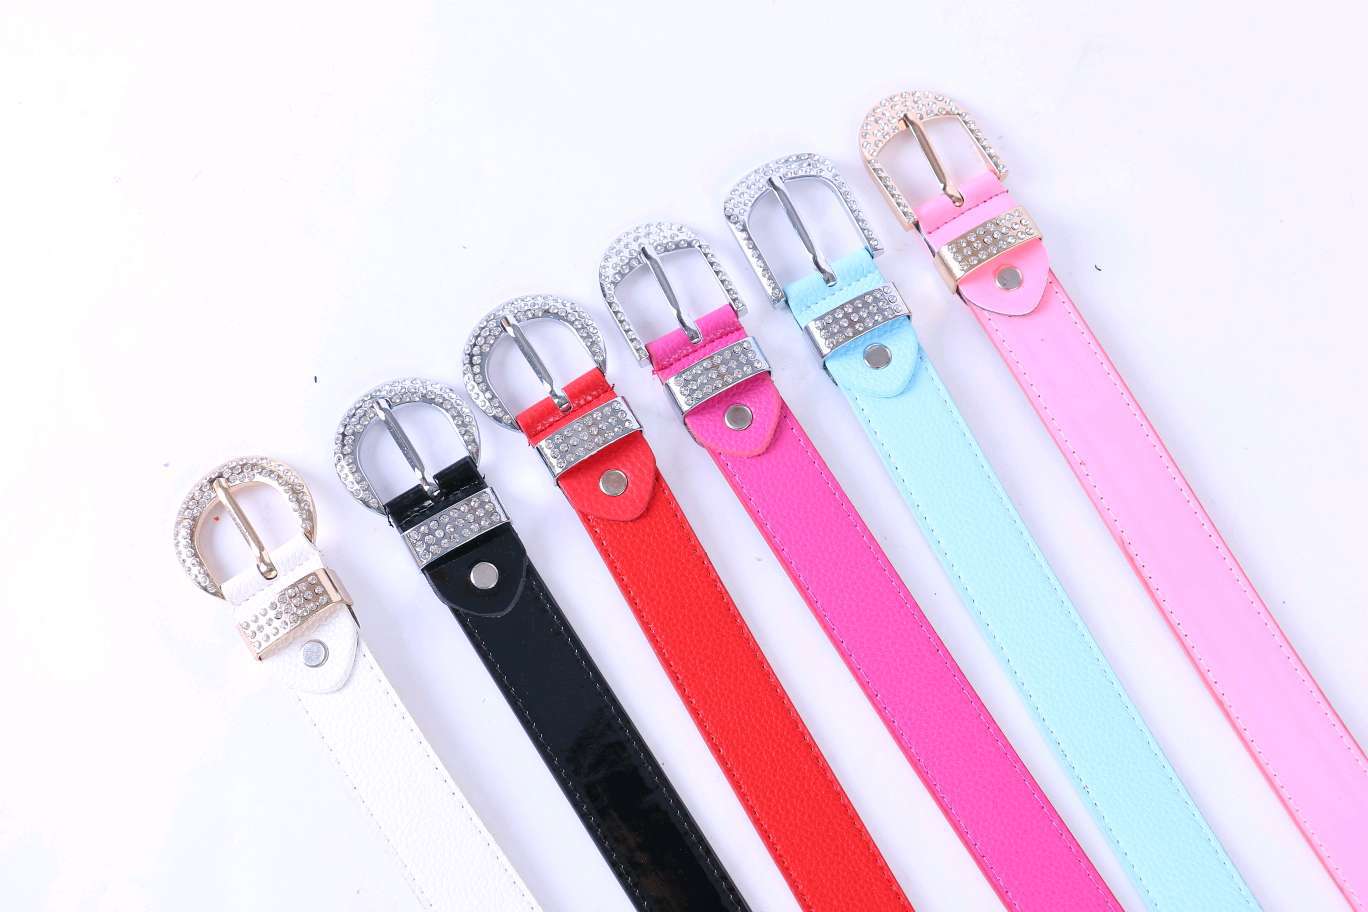 Women‘s Imitation Leather Belt Fashion Bag Drill Buckle Belt Primary and Secondary School Students Belt Factory Direct Sales